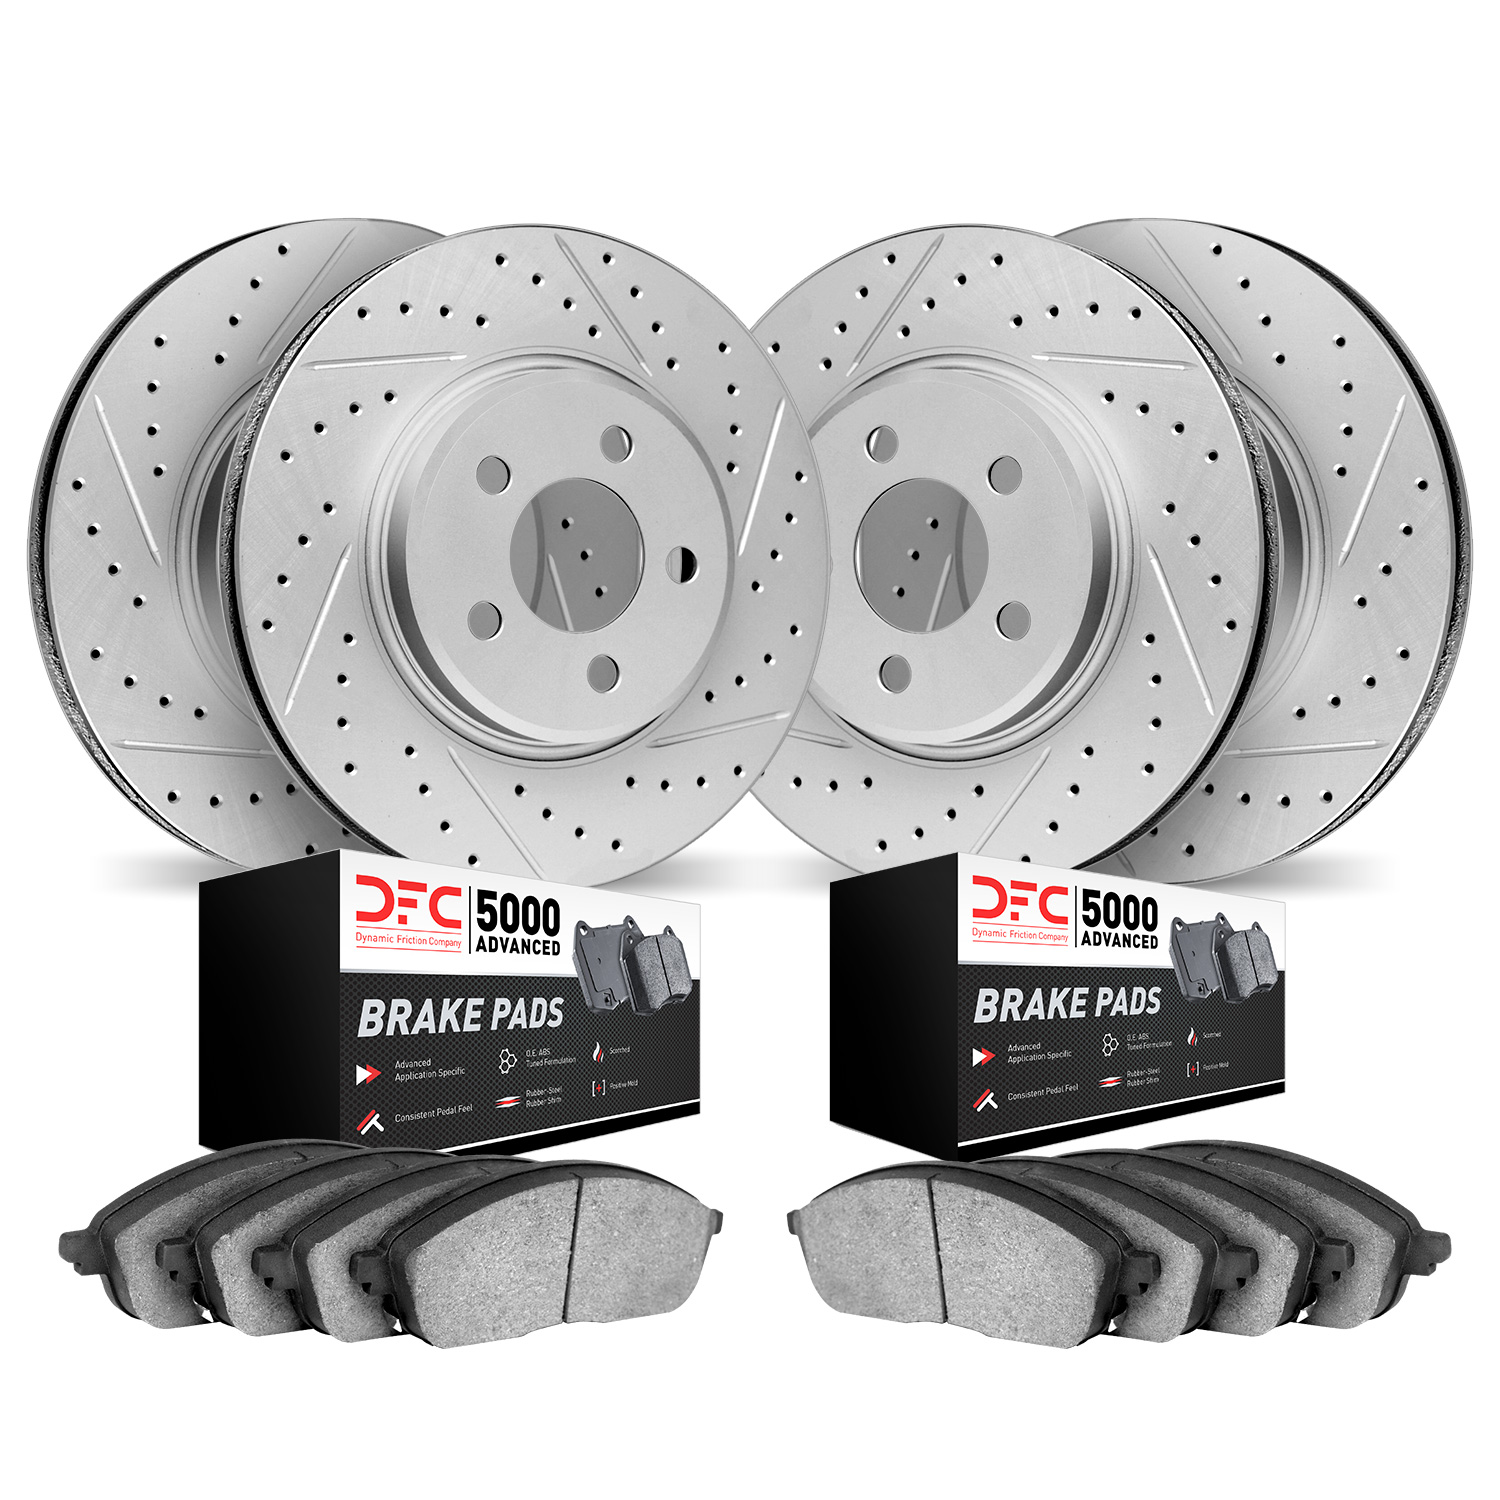 2504-42063 Geoperformance Drilled/Slotted Rotors w/5000 Advanced Brake Pads Kit, Fits Select Mopar, Position: Front and Rear